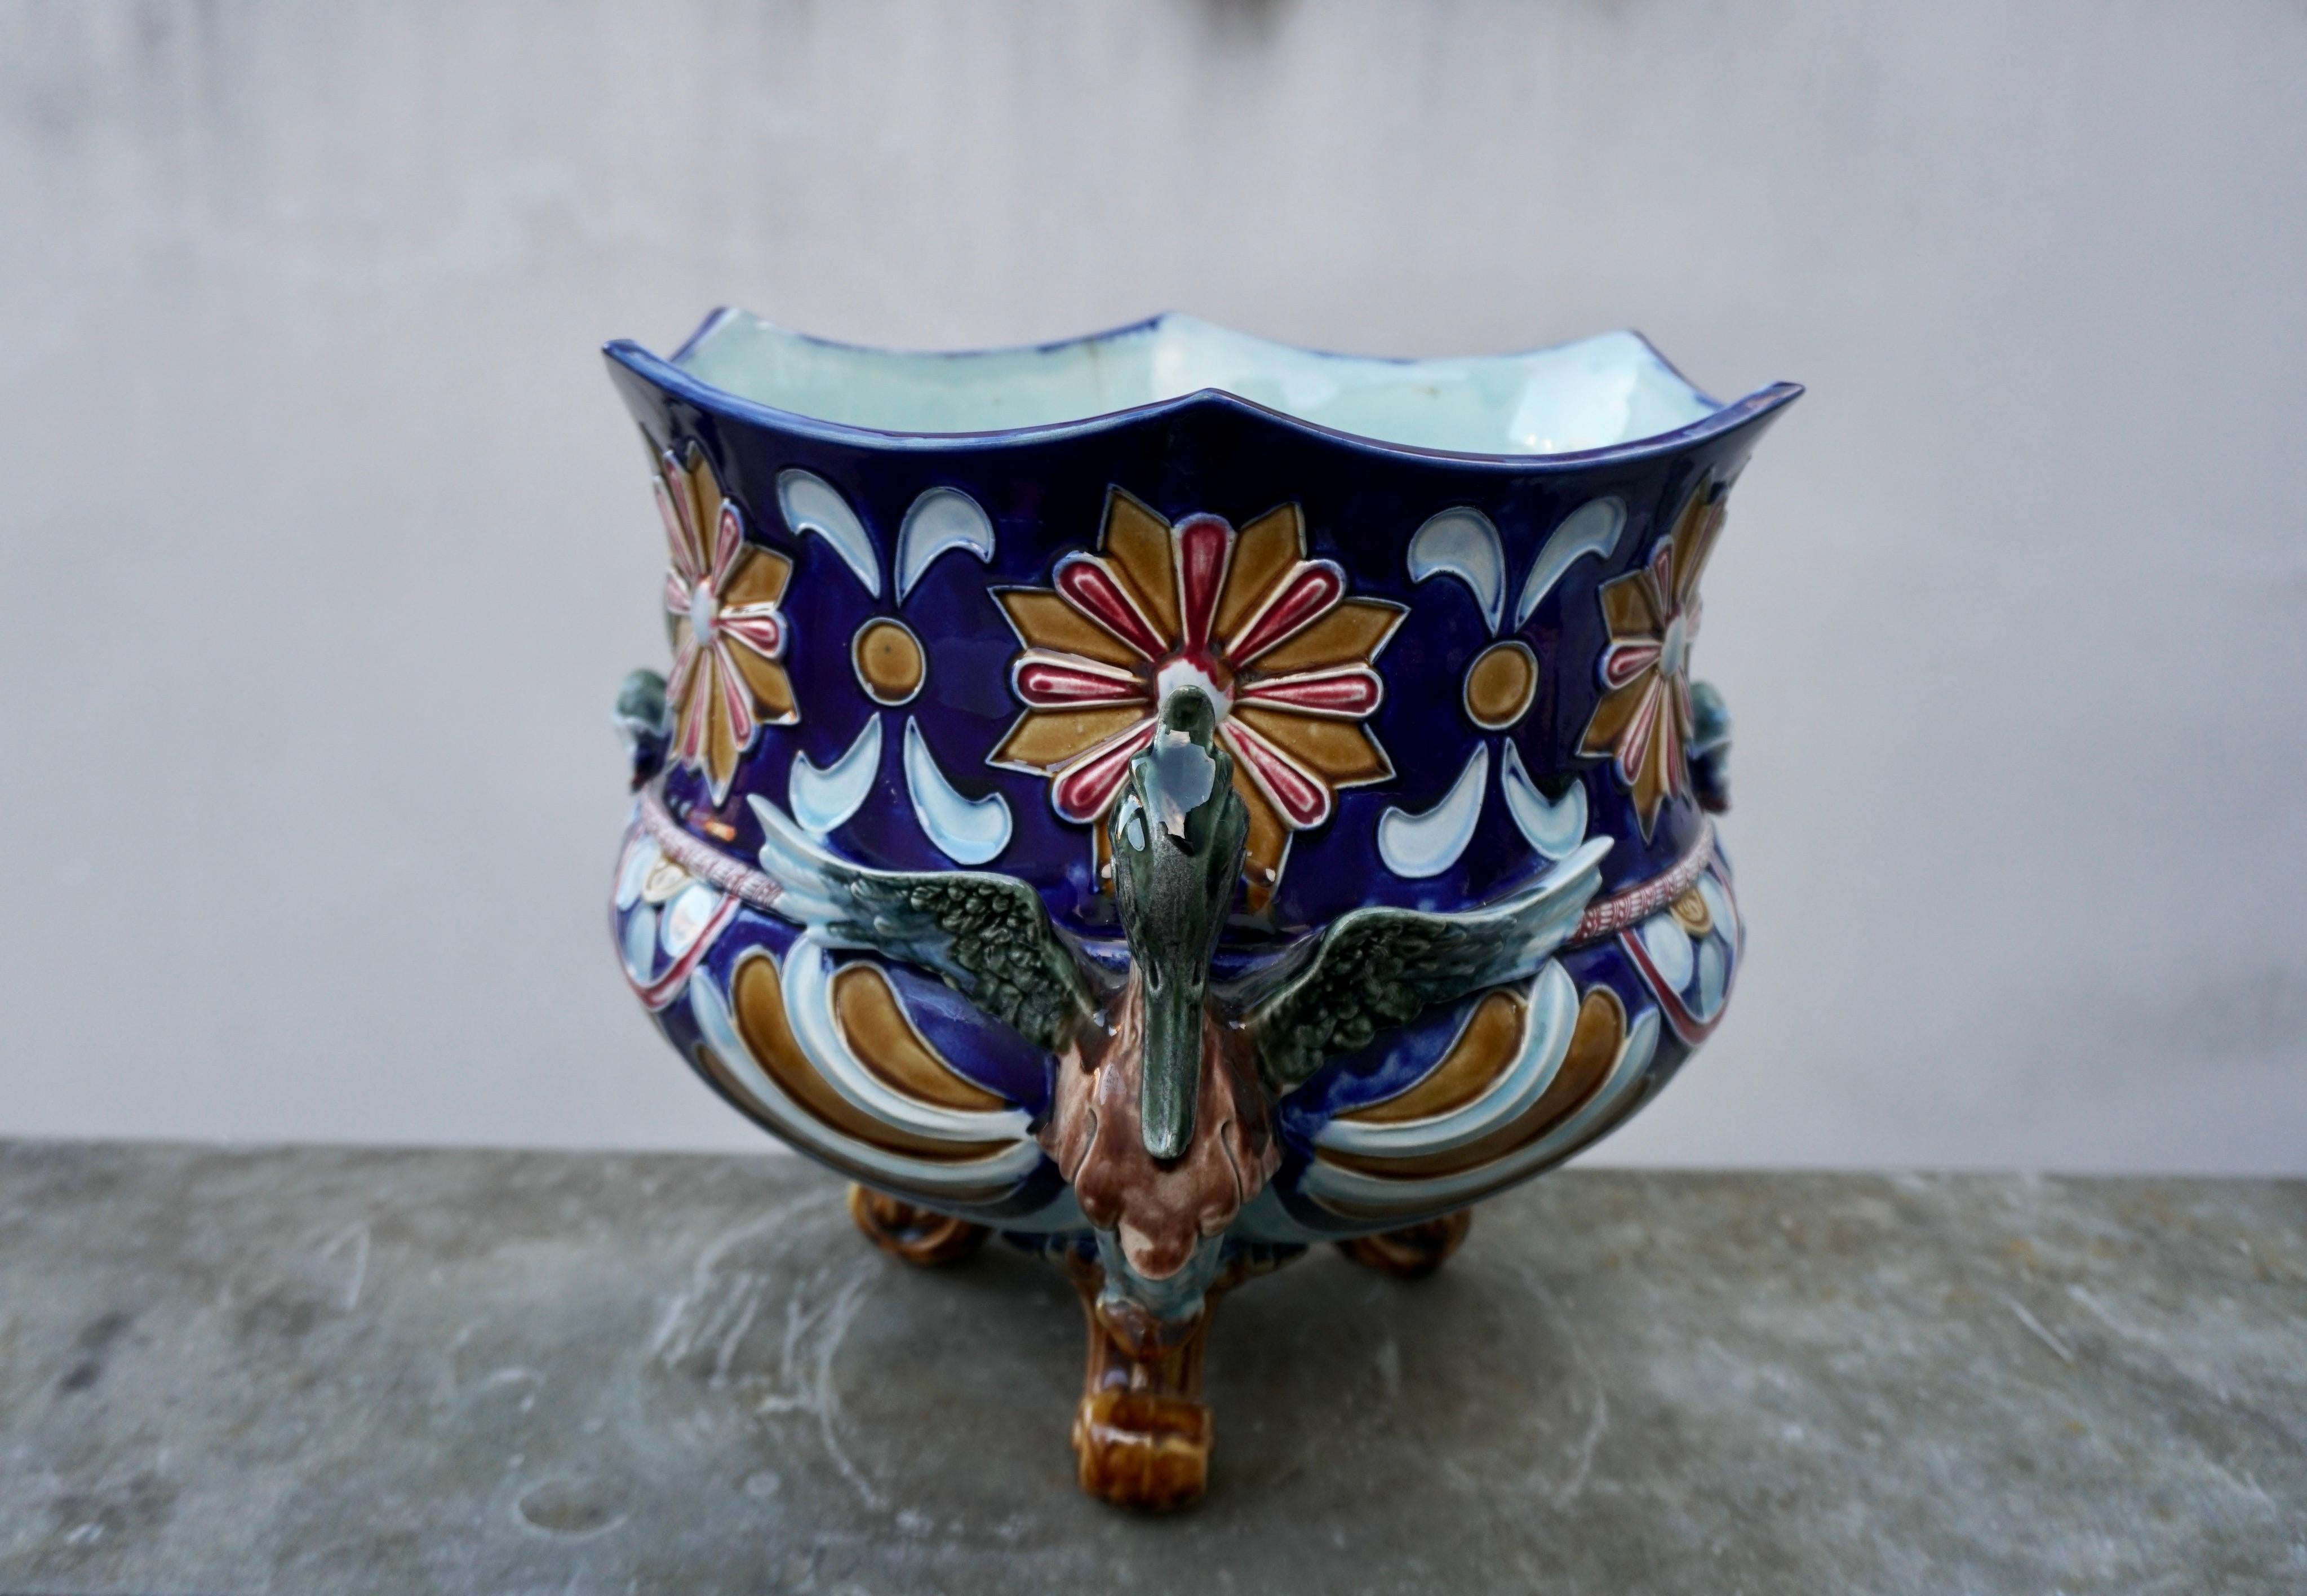 Glazed Rare Antique French Majolica Planter Jardiniere with Winged Griffins and Flowers For Sale